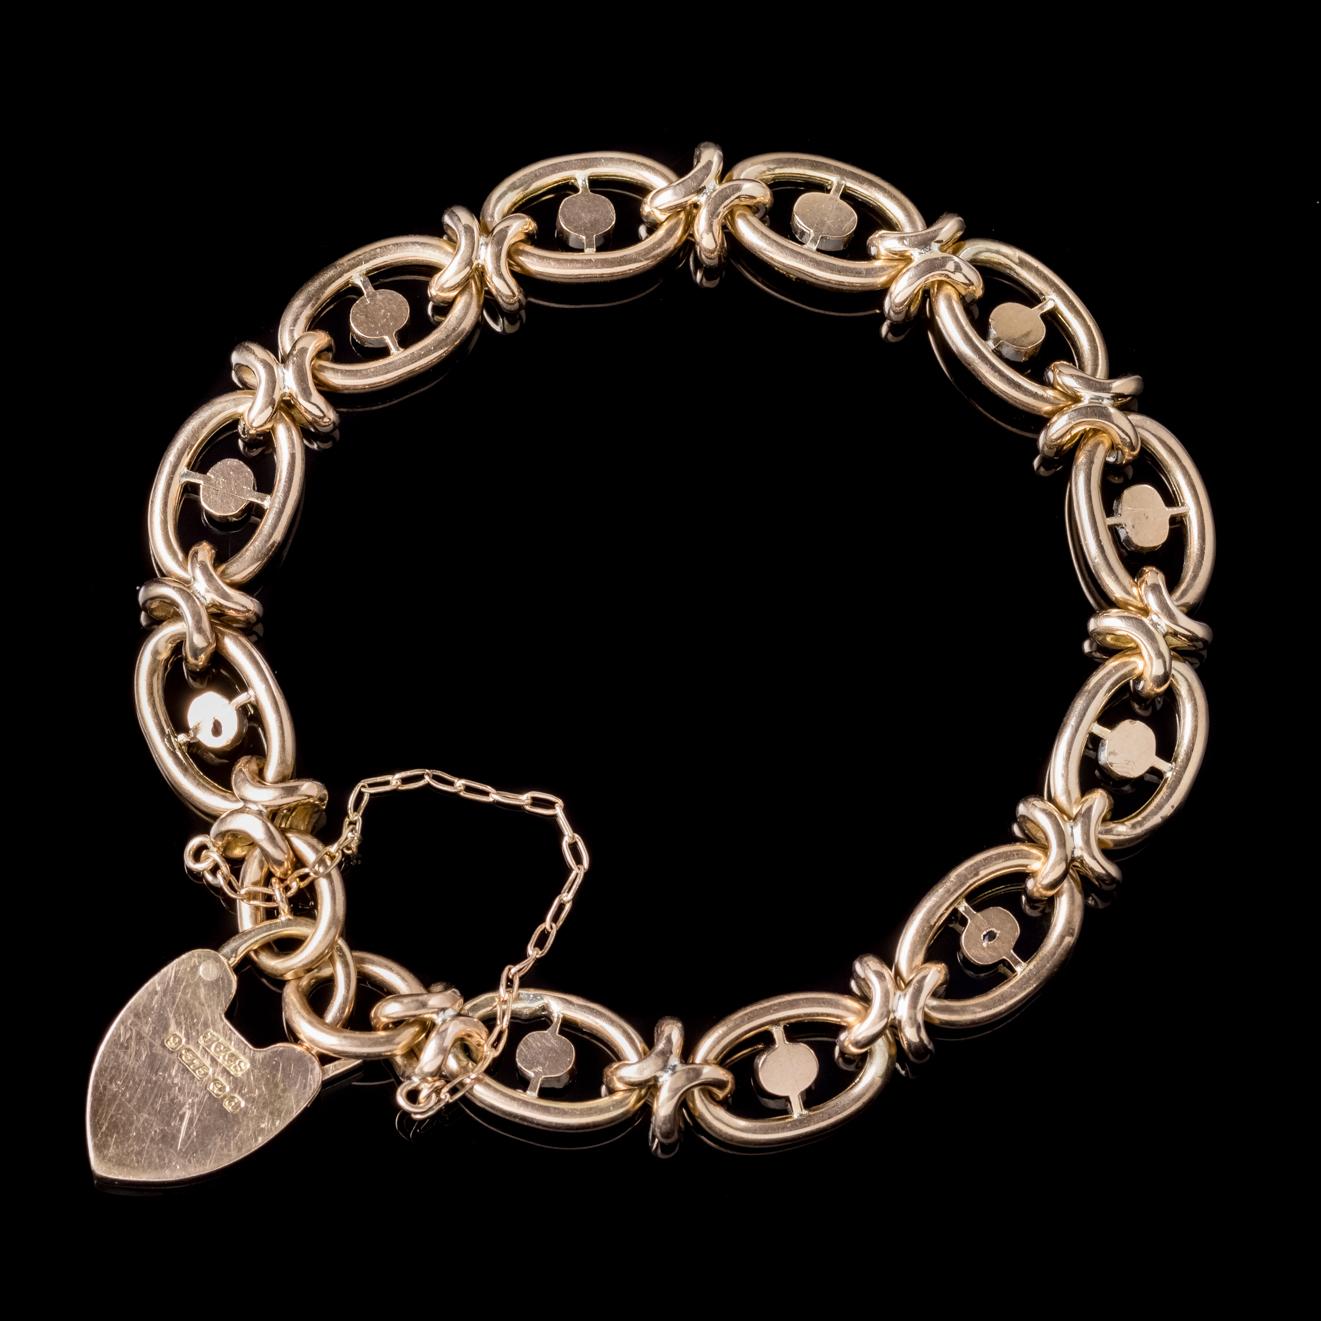 A fabulous antique Victorian Suffragette bracelet made up of pretty Gold links adorned with violet Amethyst, green Peridot and white Pearls. 

Suffragettes liked to be depicted as feminine, their jewellery popularly consisted of Violet, Green and